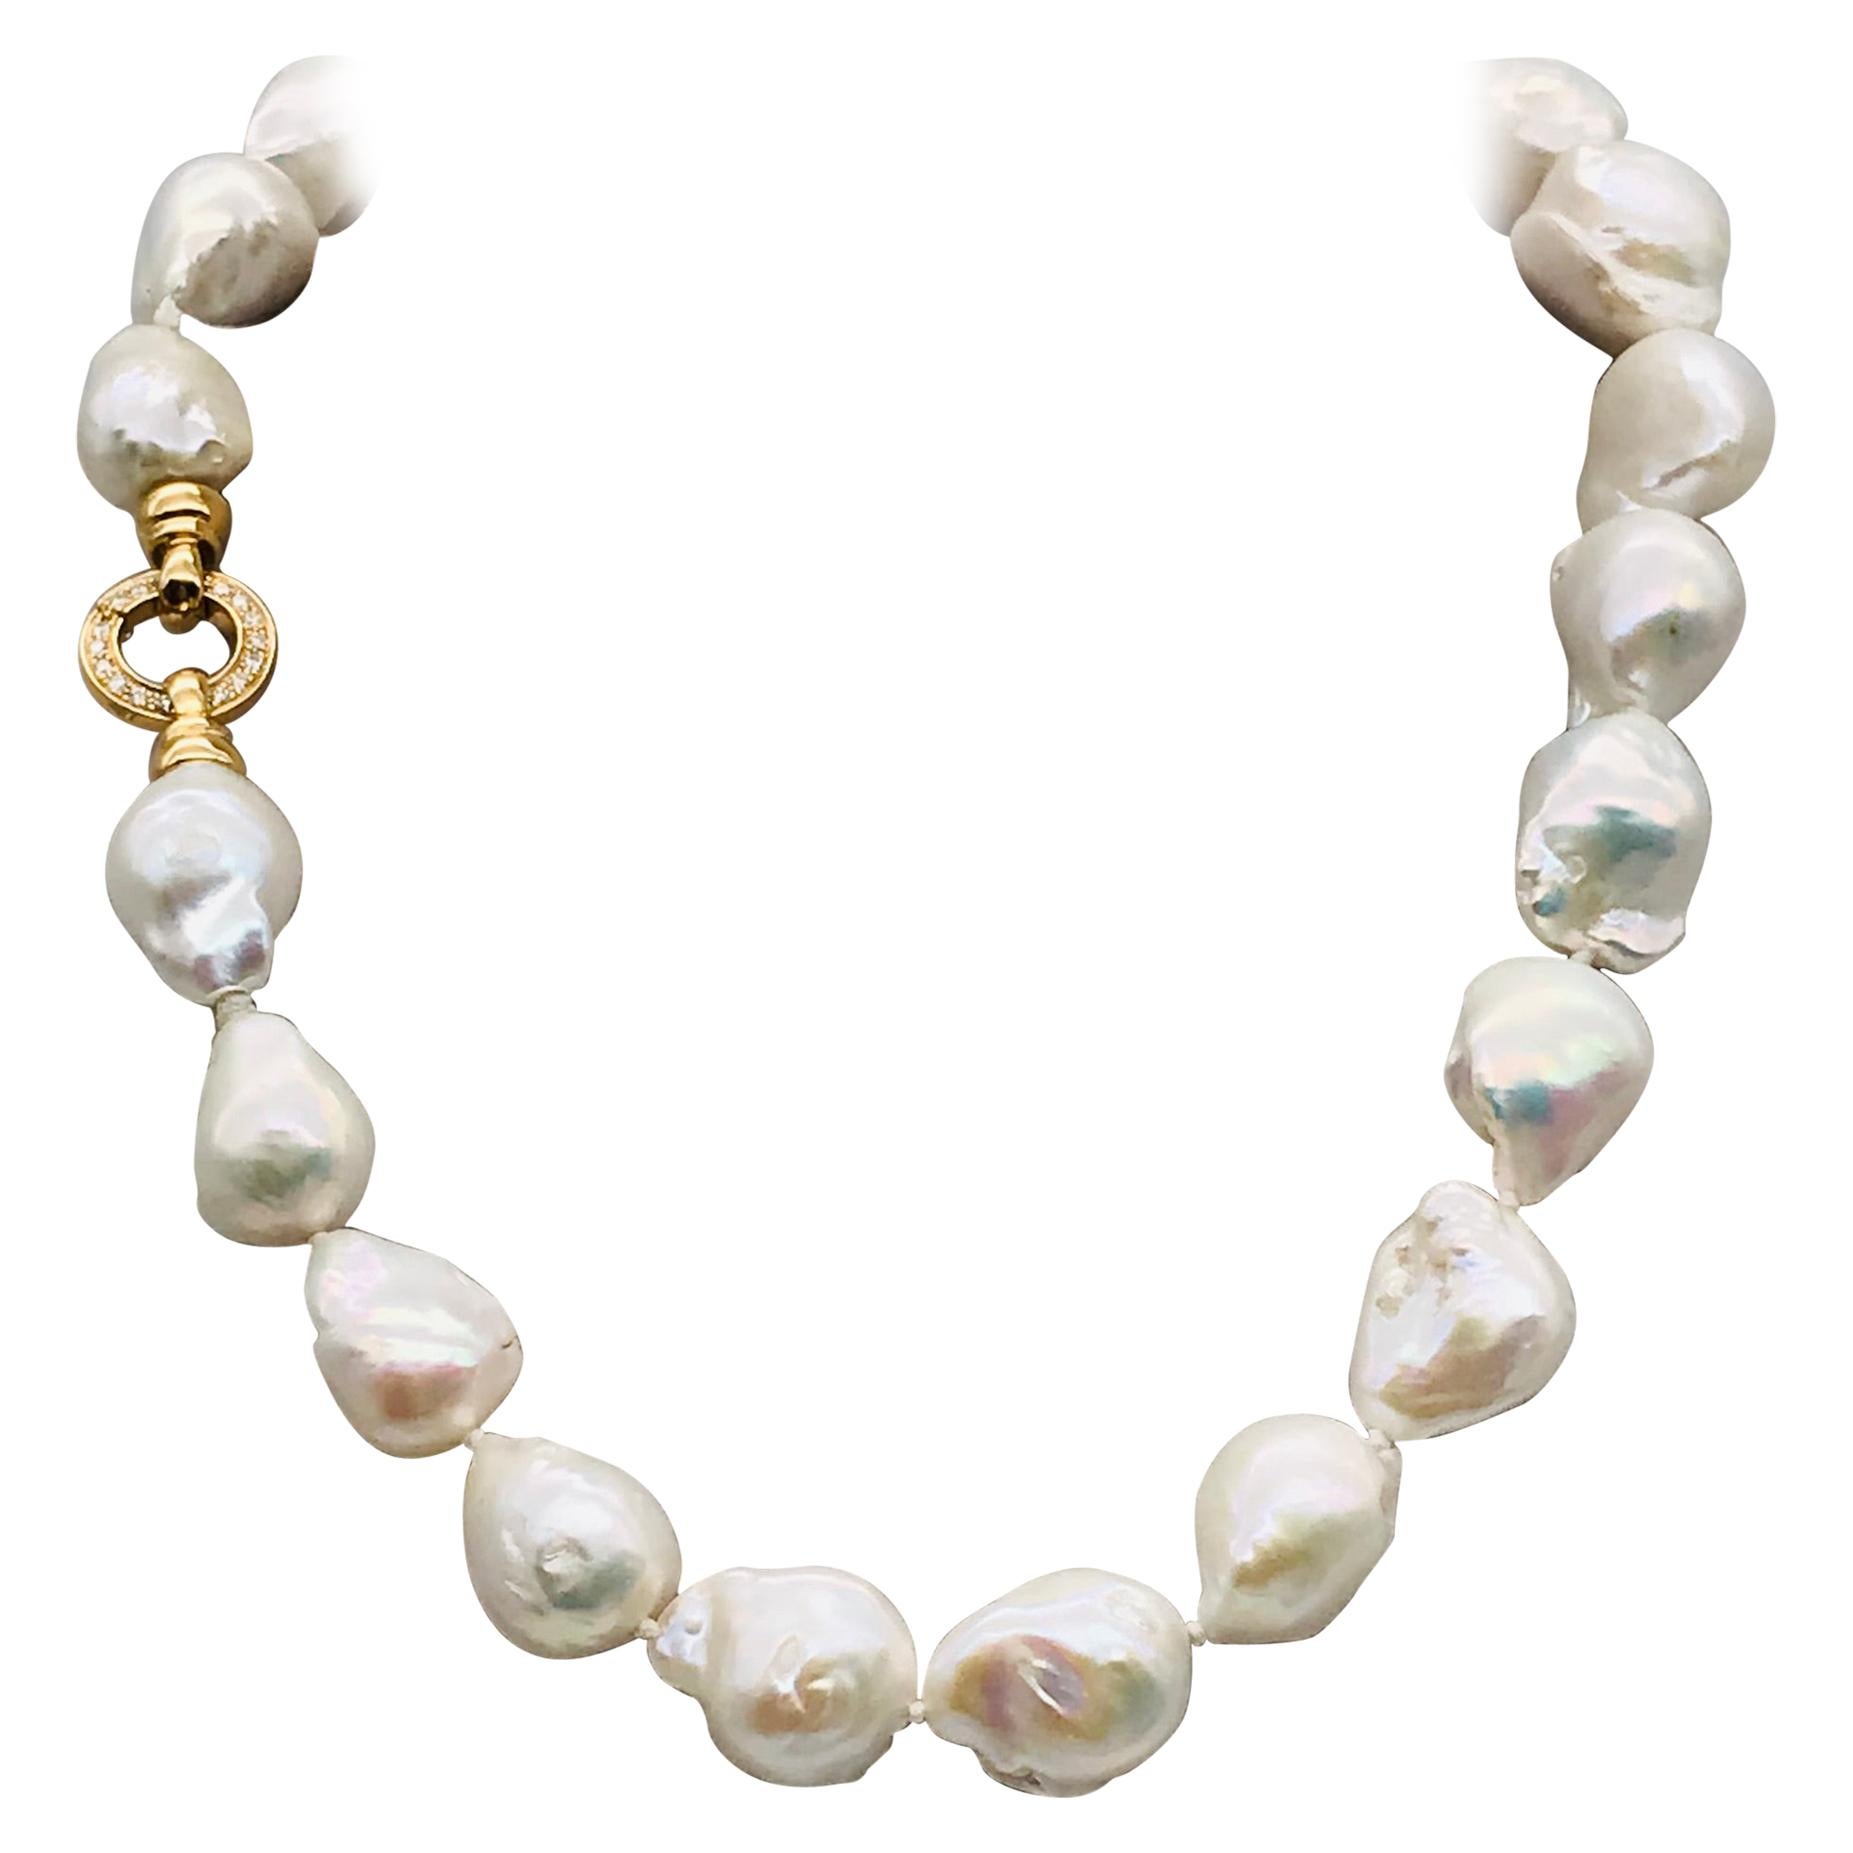 Baroques Pearls Necklaces with Gold and Diamonds Clasp